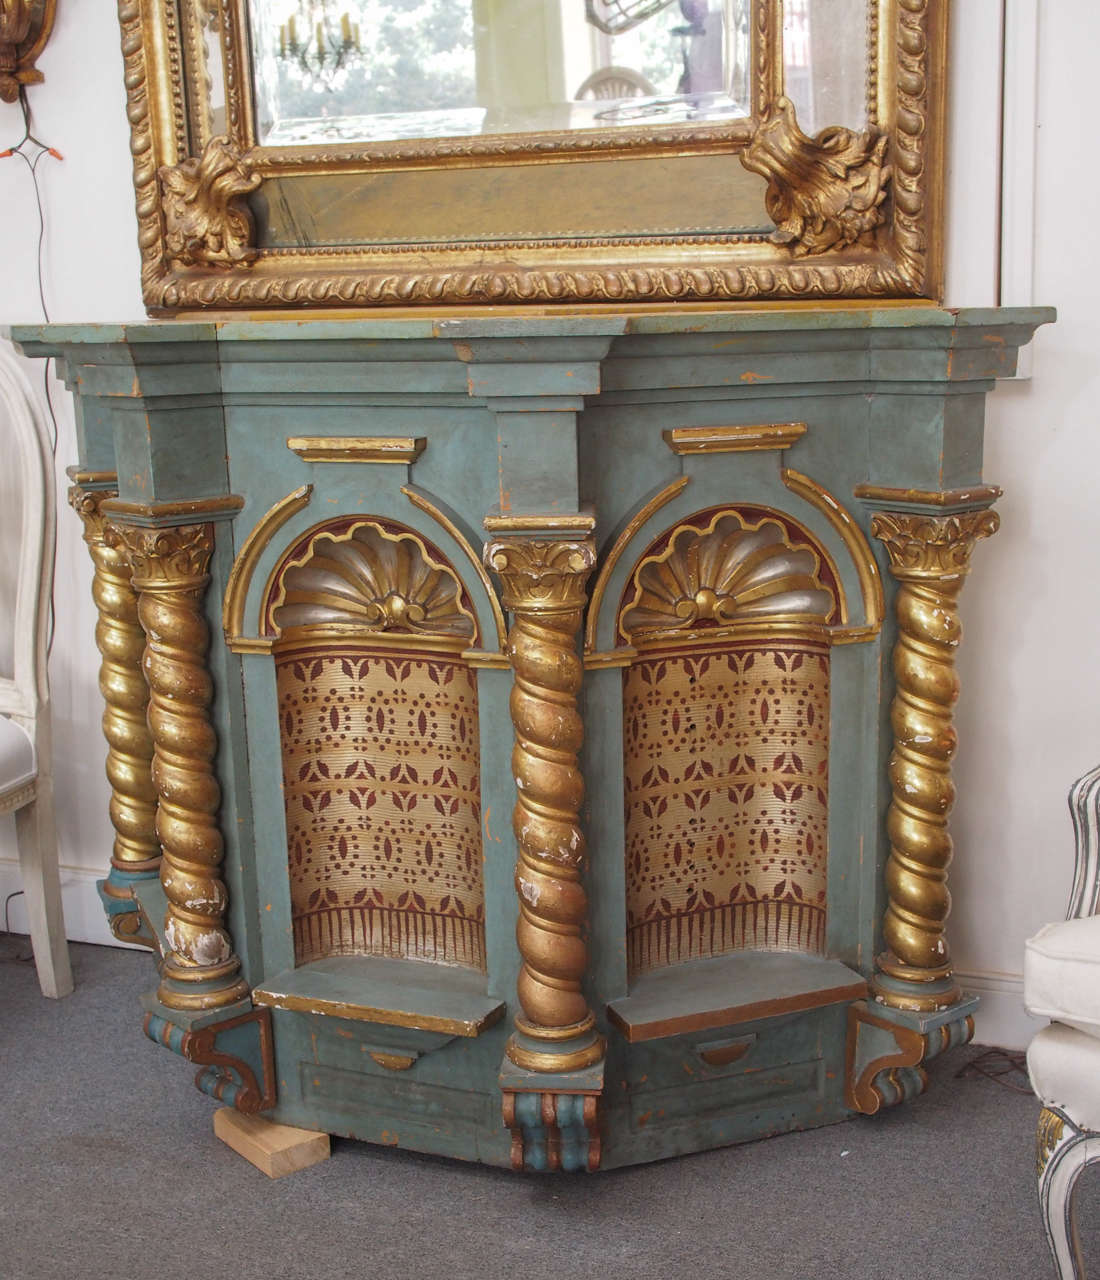 Originally part of a larger architectural structure, this carved wood piece stands beautifully on its own. It is a faded Venetian blue with gilt and gold accents; it houses three-arched intricately stenciled concave niches surmounted by a shell